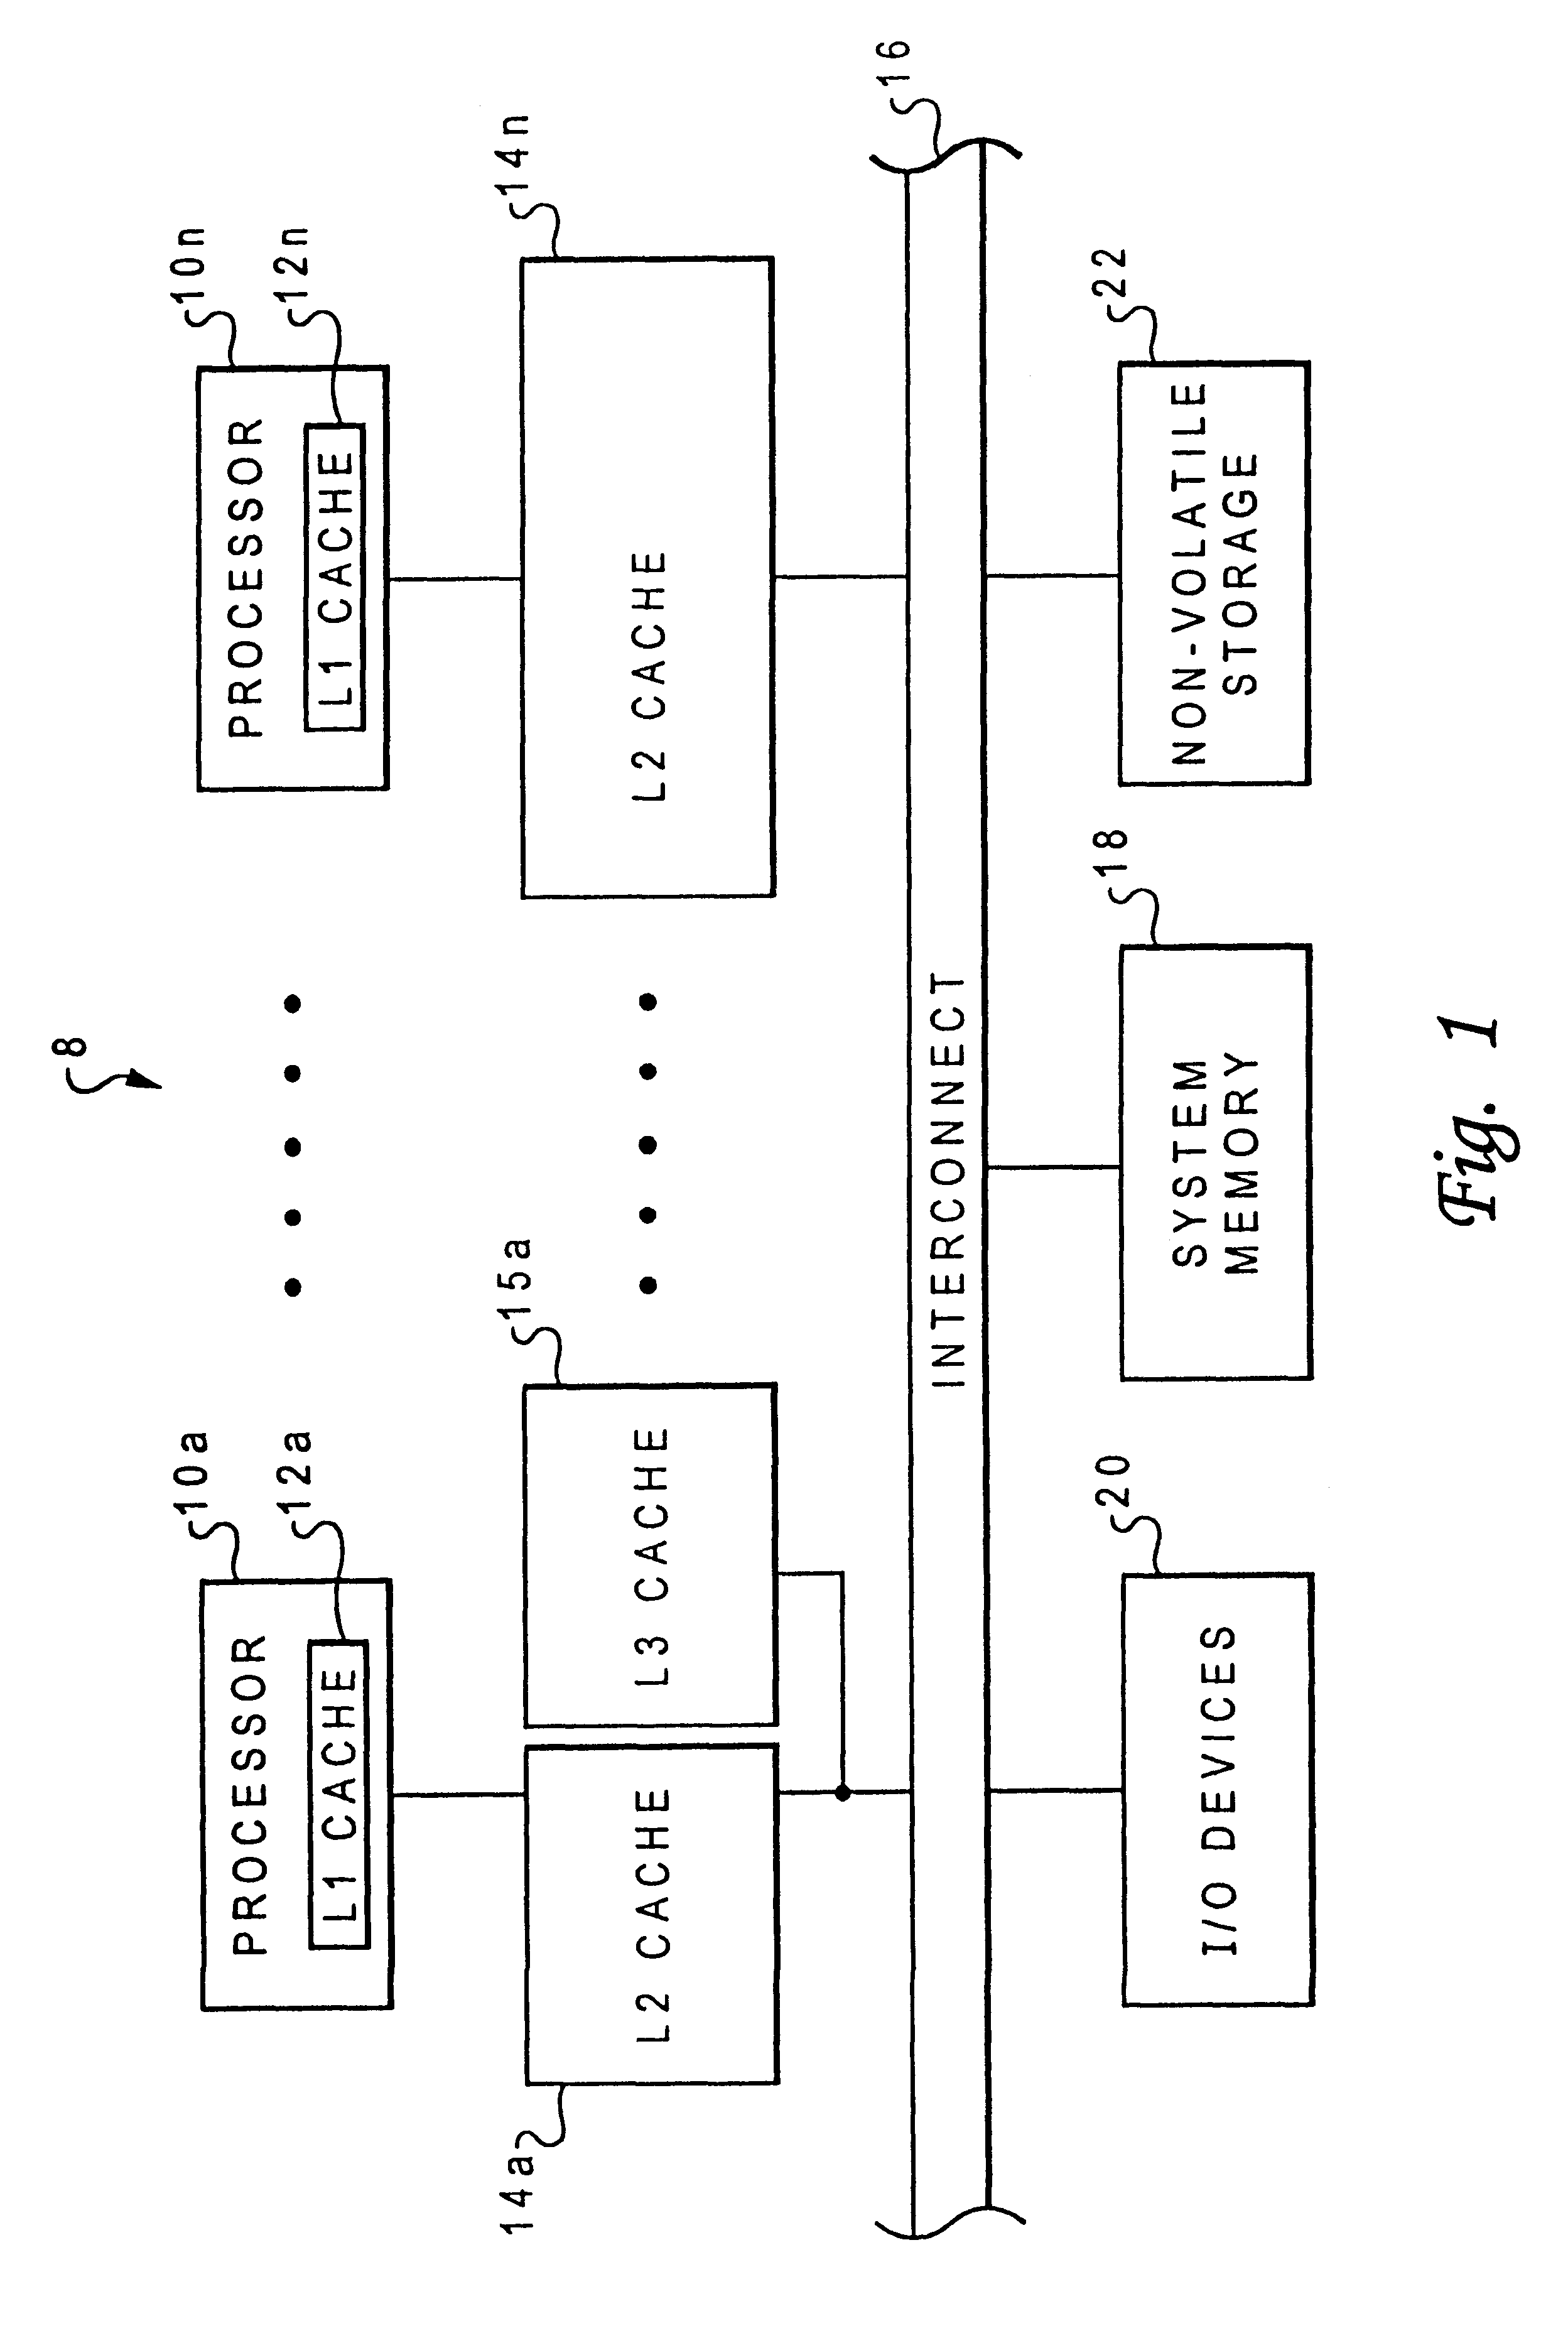 Cache coherency protocol for a data processing system including a multi-level memory hierarchy